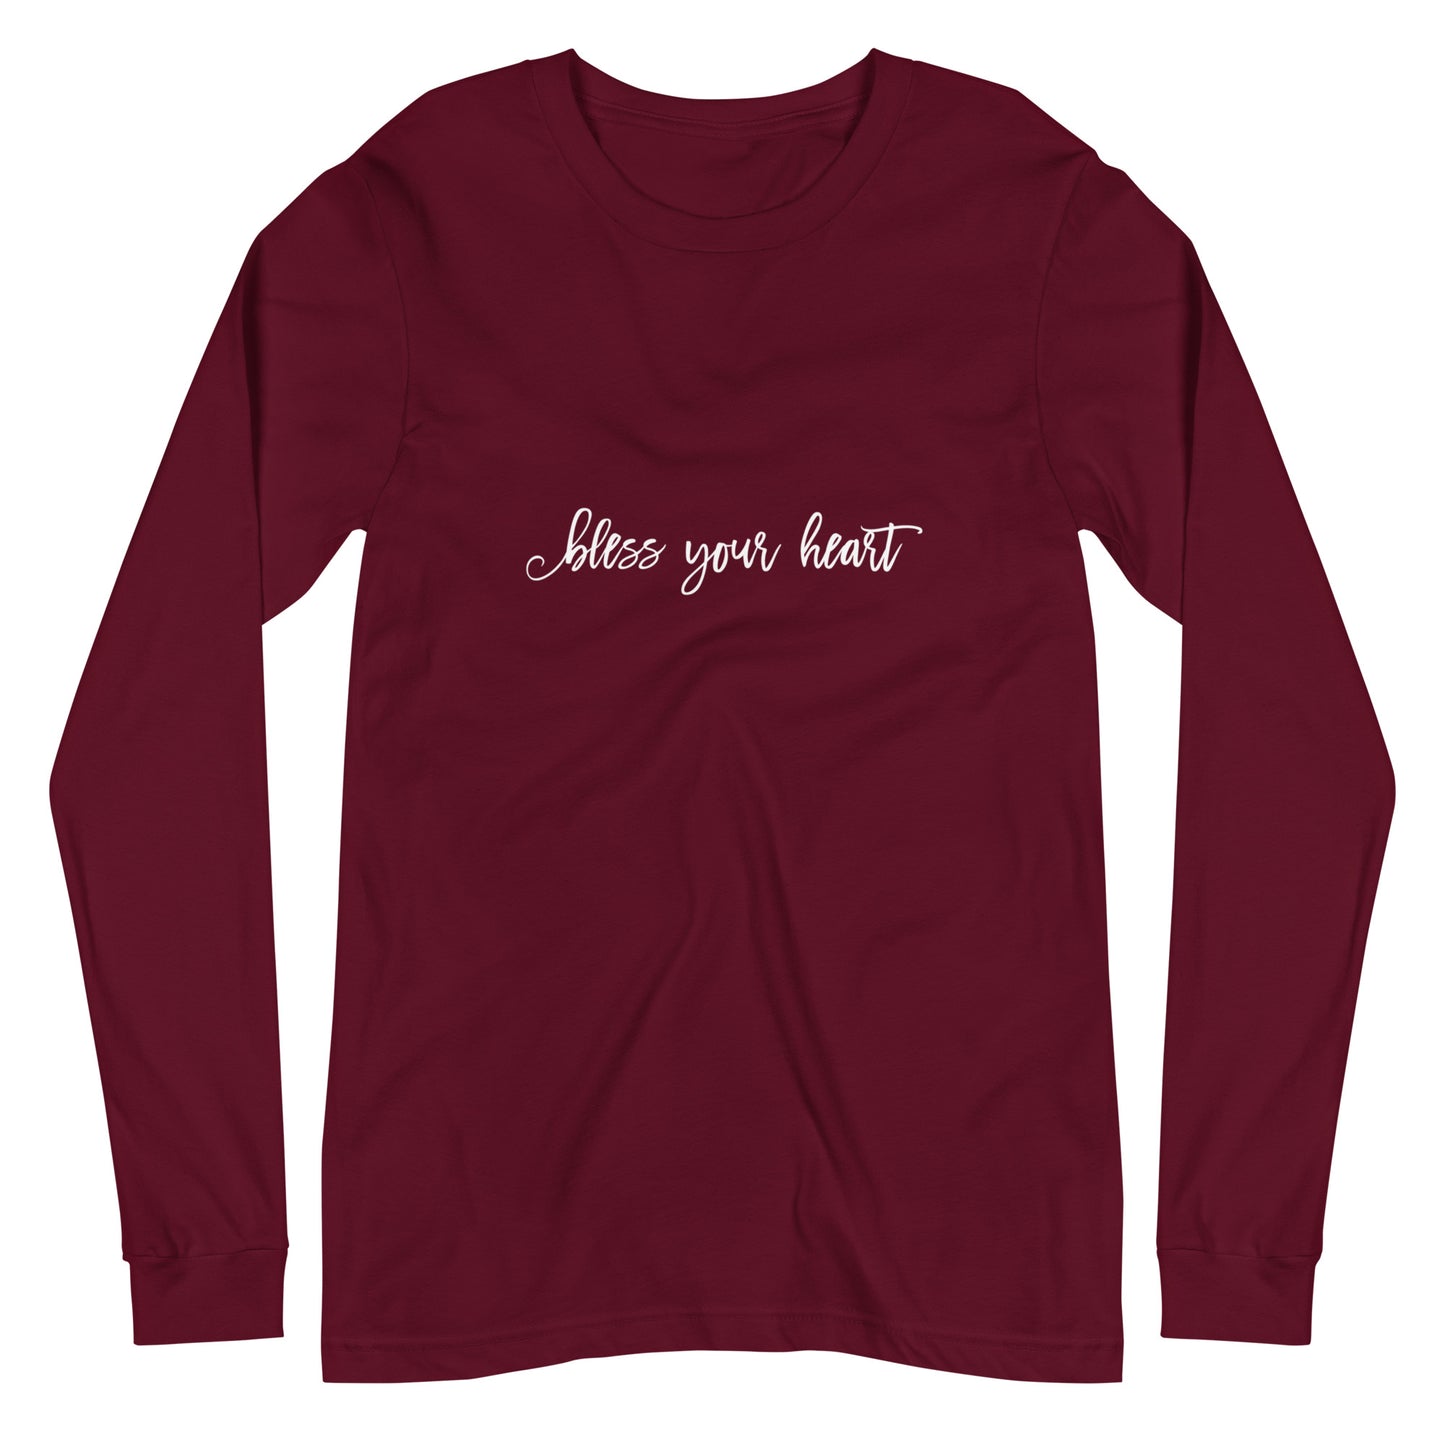 Maroon long-sleeve t-shirt with white graphic in an excessively twee font: "bless your heart"